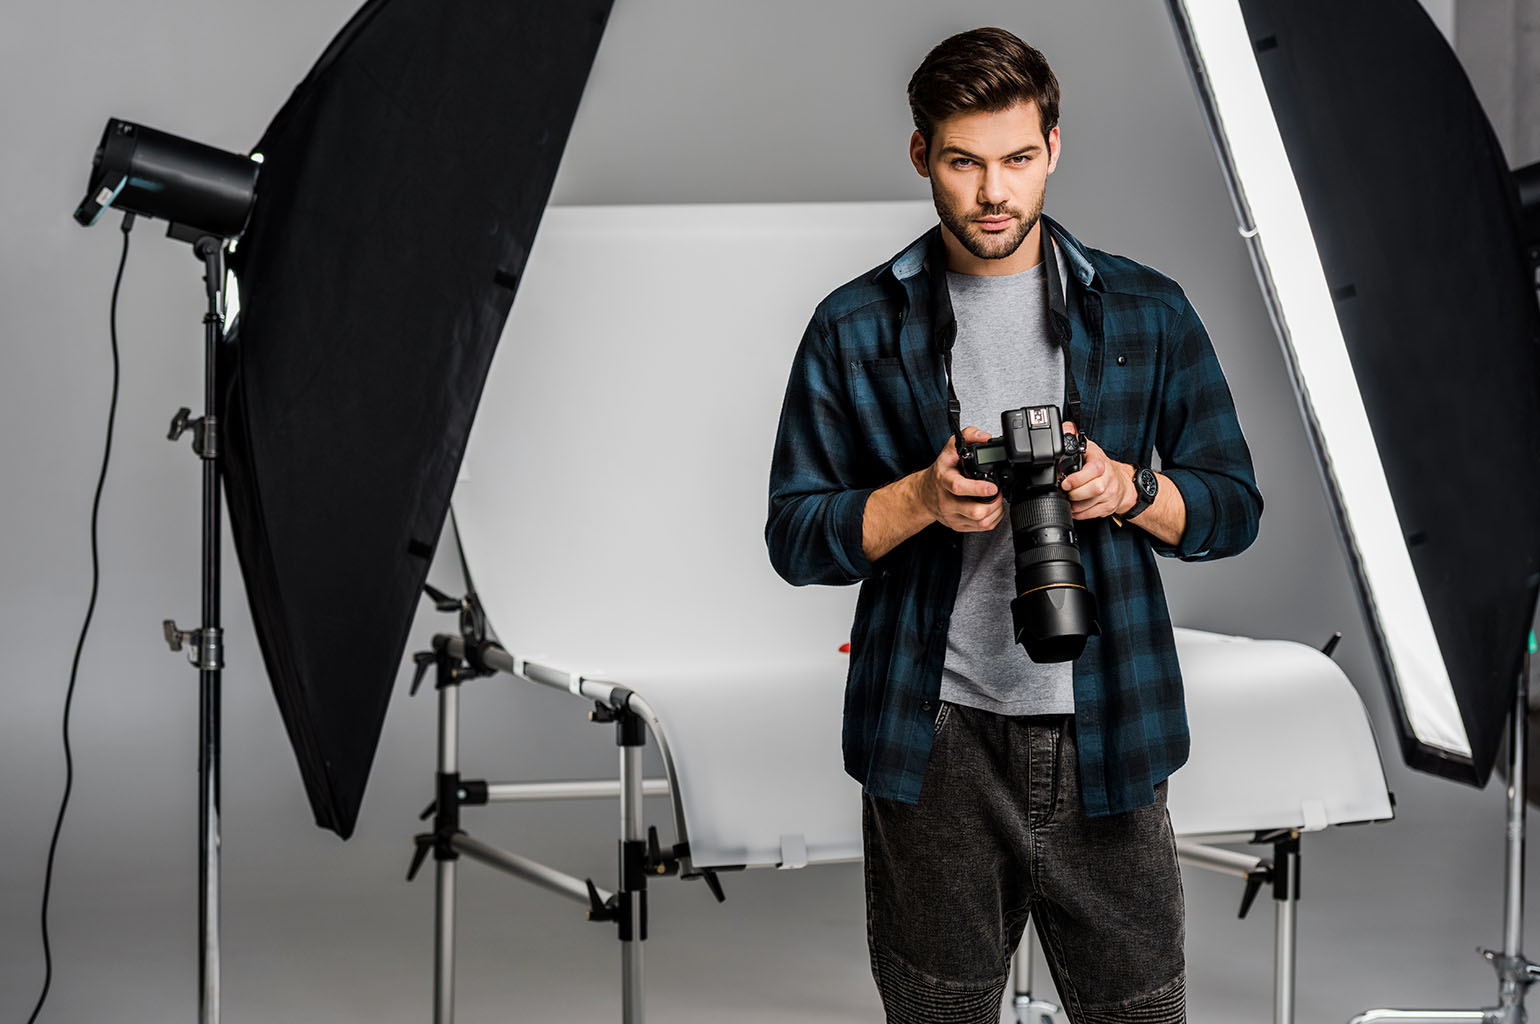 Photography Business Branding: How to Stand Out in a Saturated Market